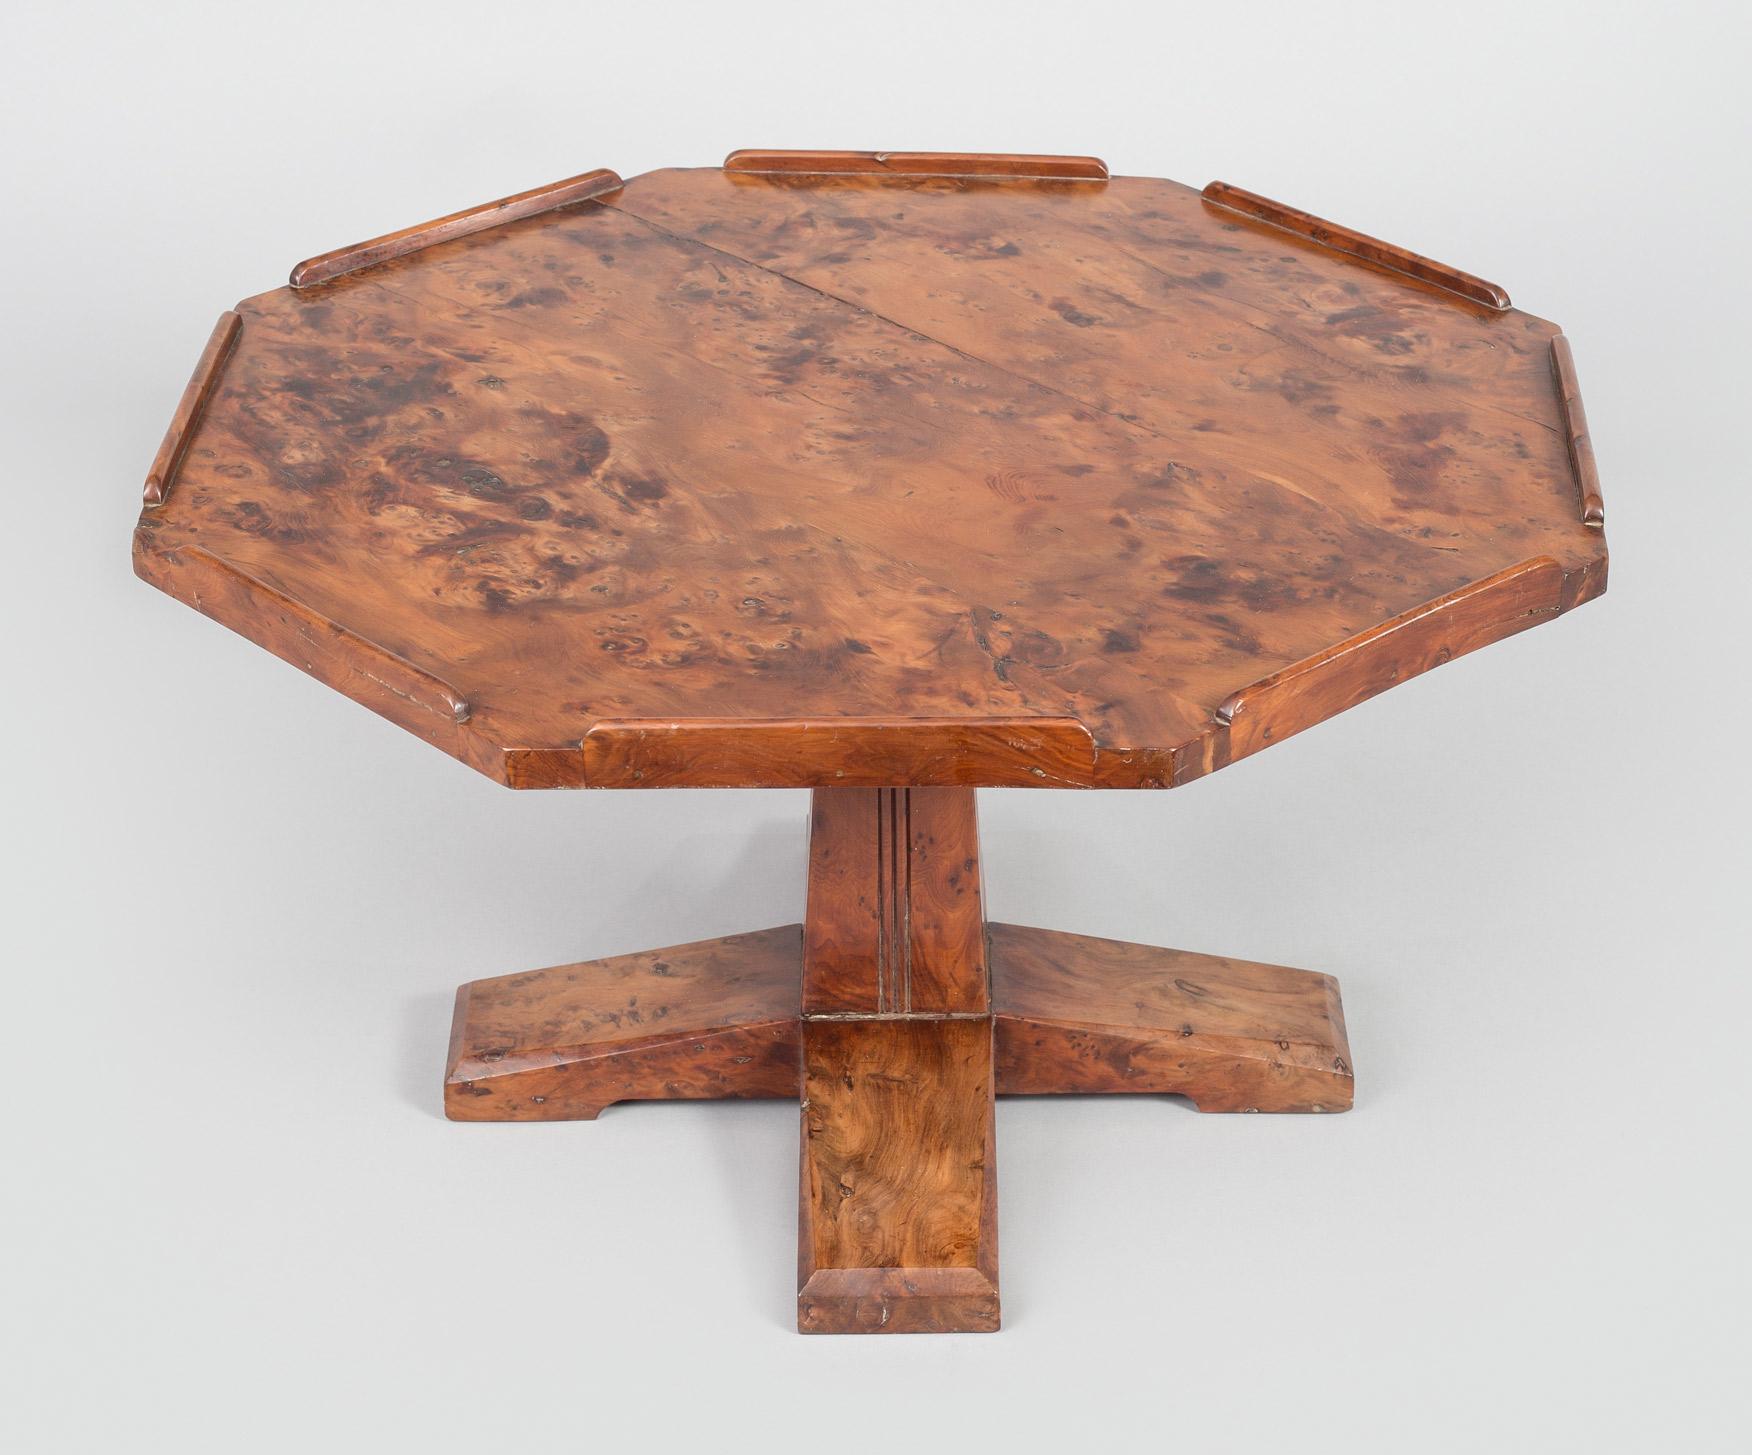 English Arts & Crafts movement octagonal-shaped burr yew wood Lazy Susan, the rotating top mounted on a squared pedestal with a four footed base. The label on the bottom of the base reads: Arthur W. Simpson (Hubert Simpson) The handicrafts, Kendal